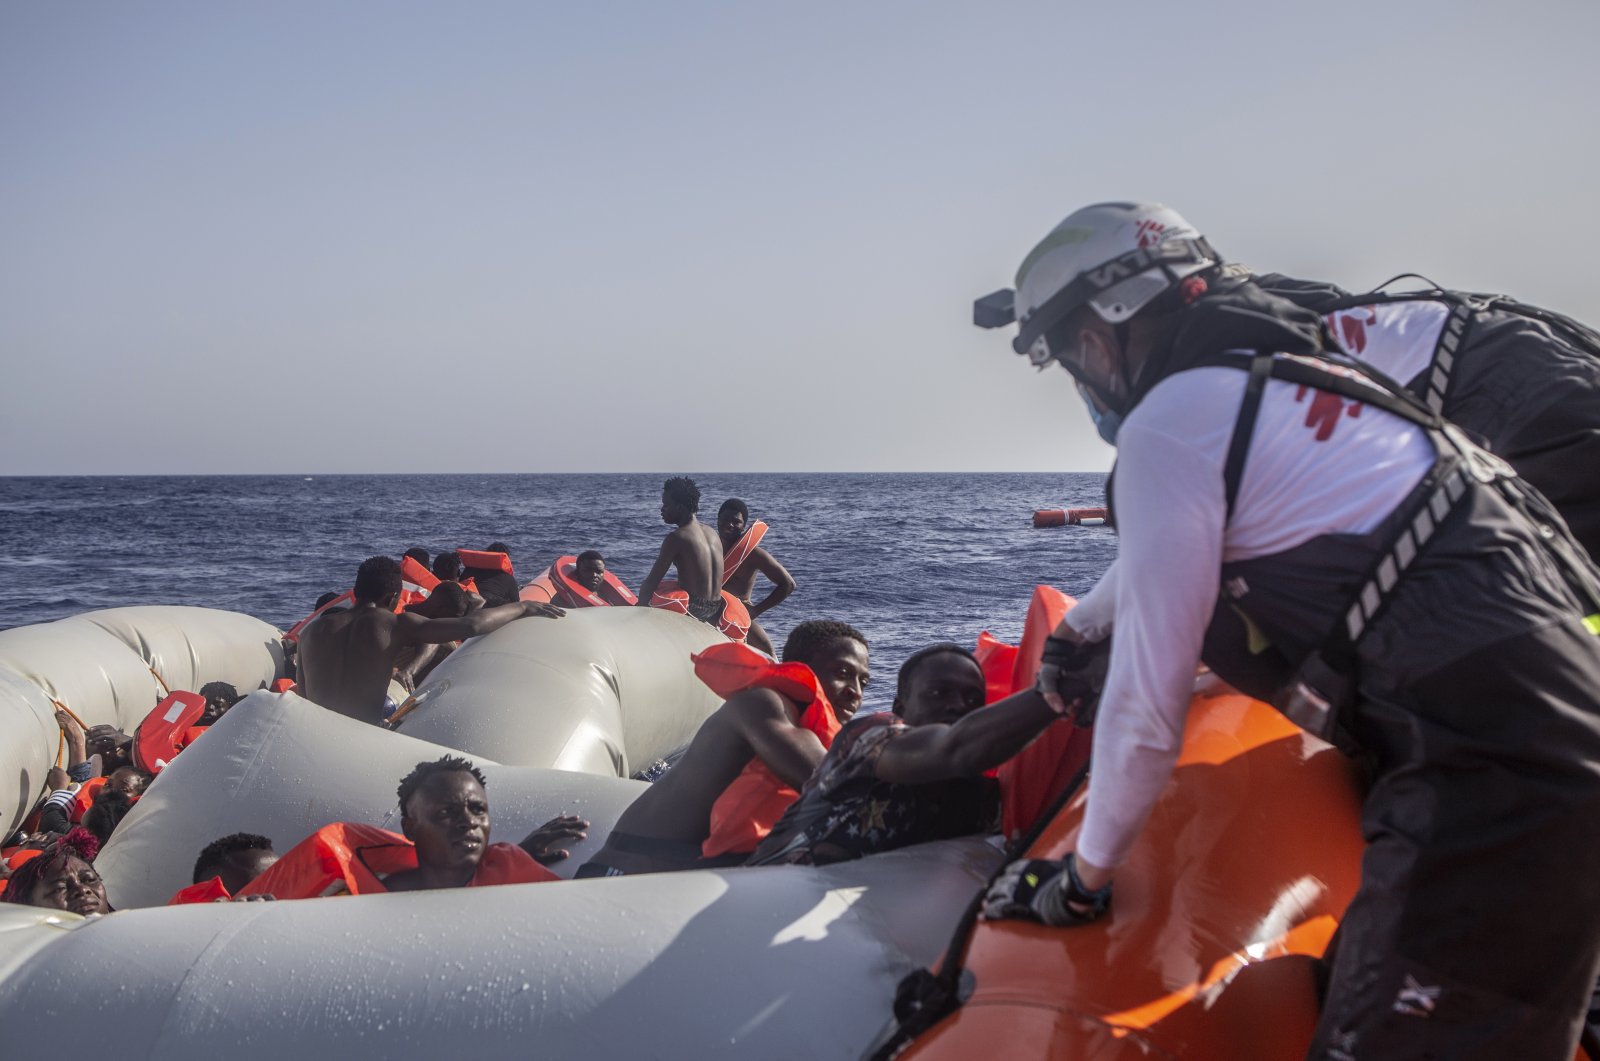 In this photo released by Doctors Without Borders (MSF) and taken on June 27, the MSF team rescues 71 people from a rubber boat in distress, Mediterranean Sea, June 29, 2022. (MSF via AP)